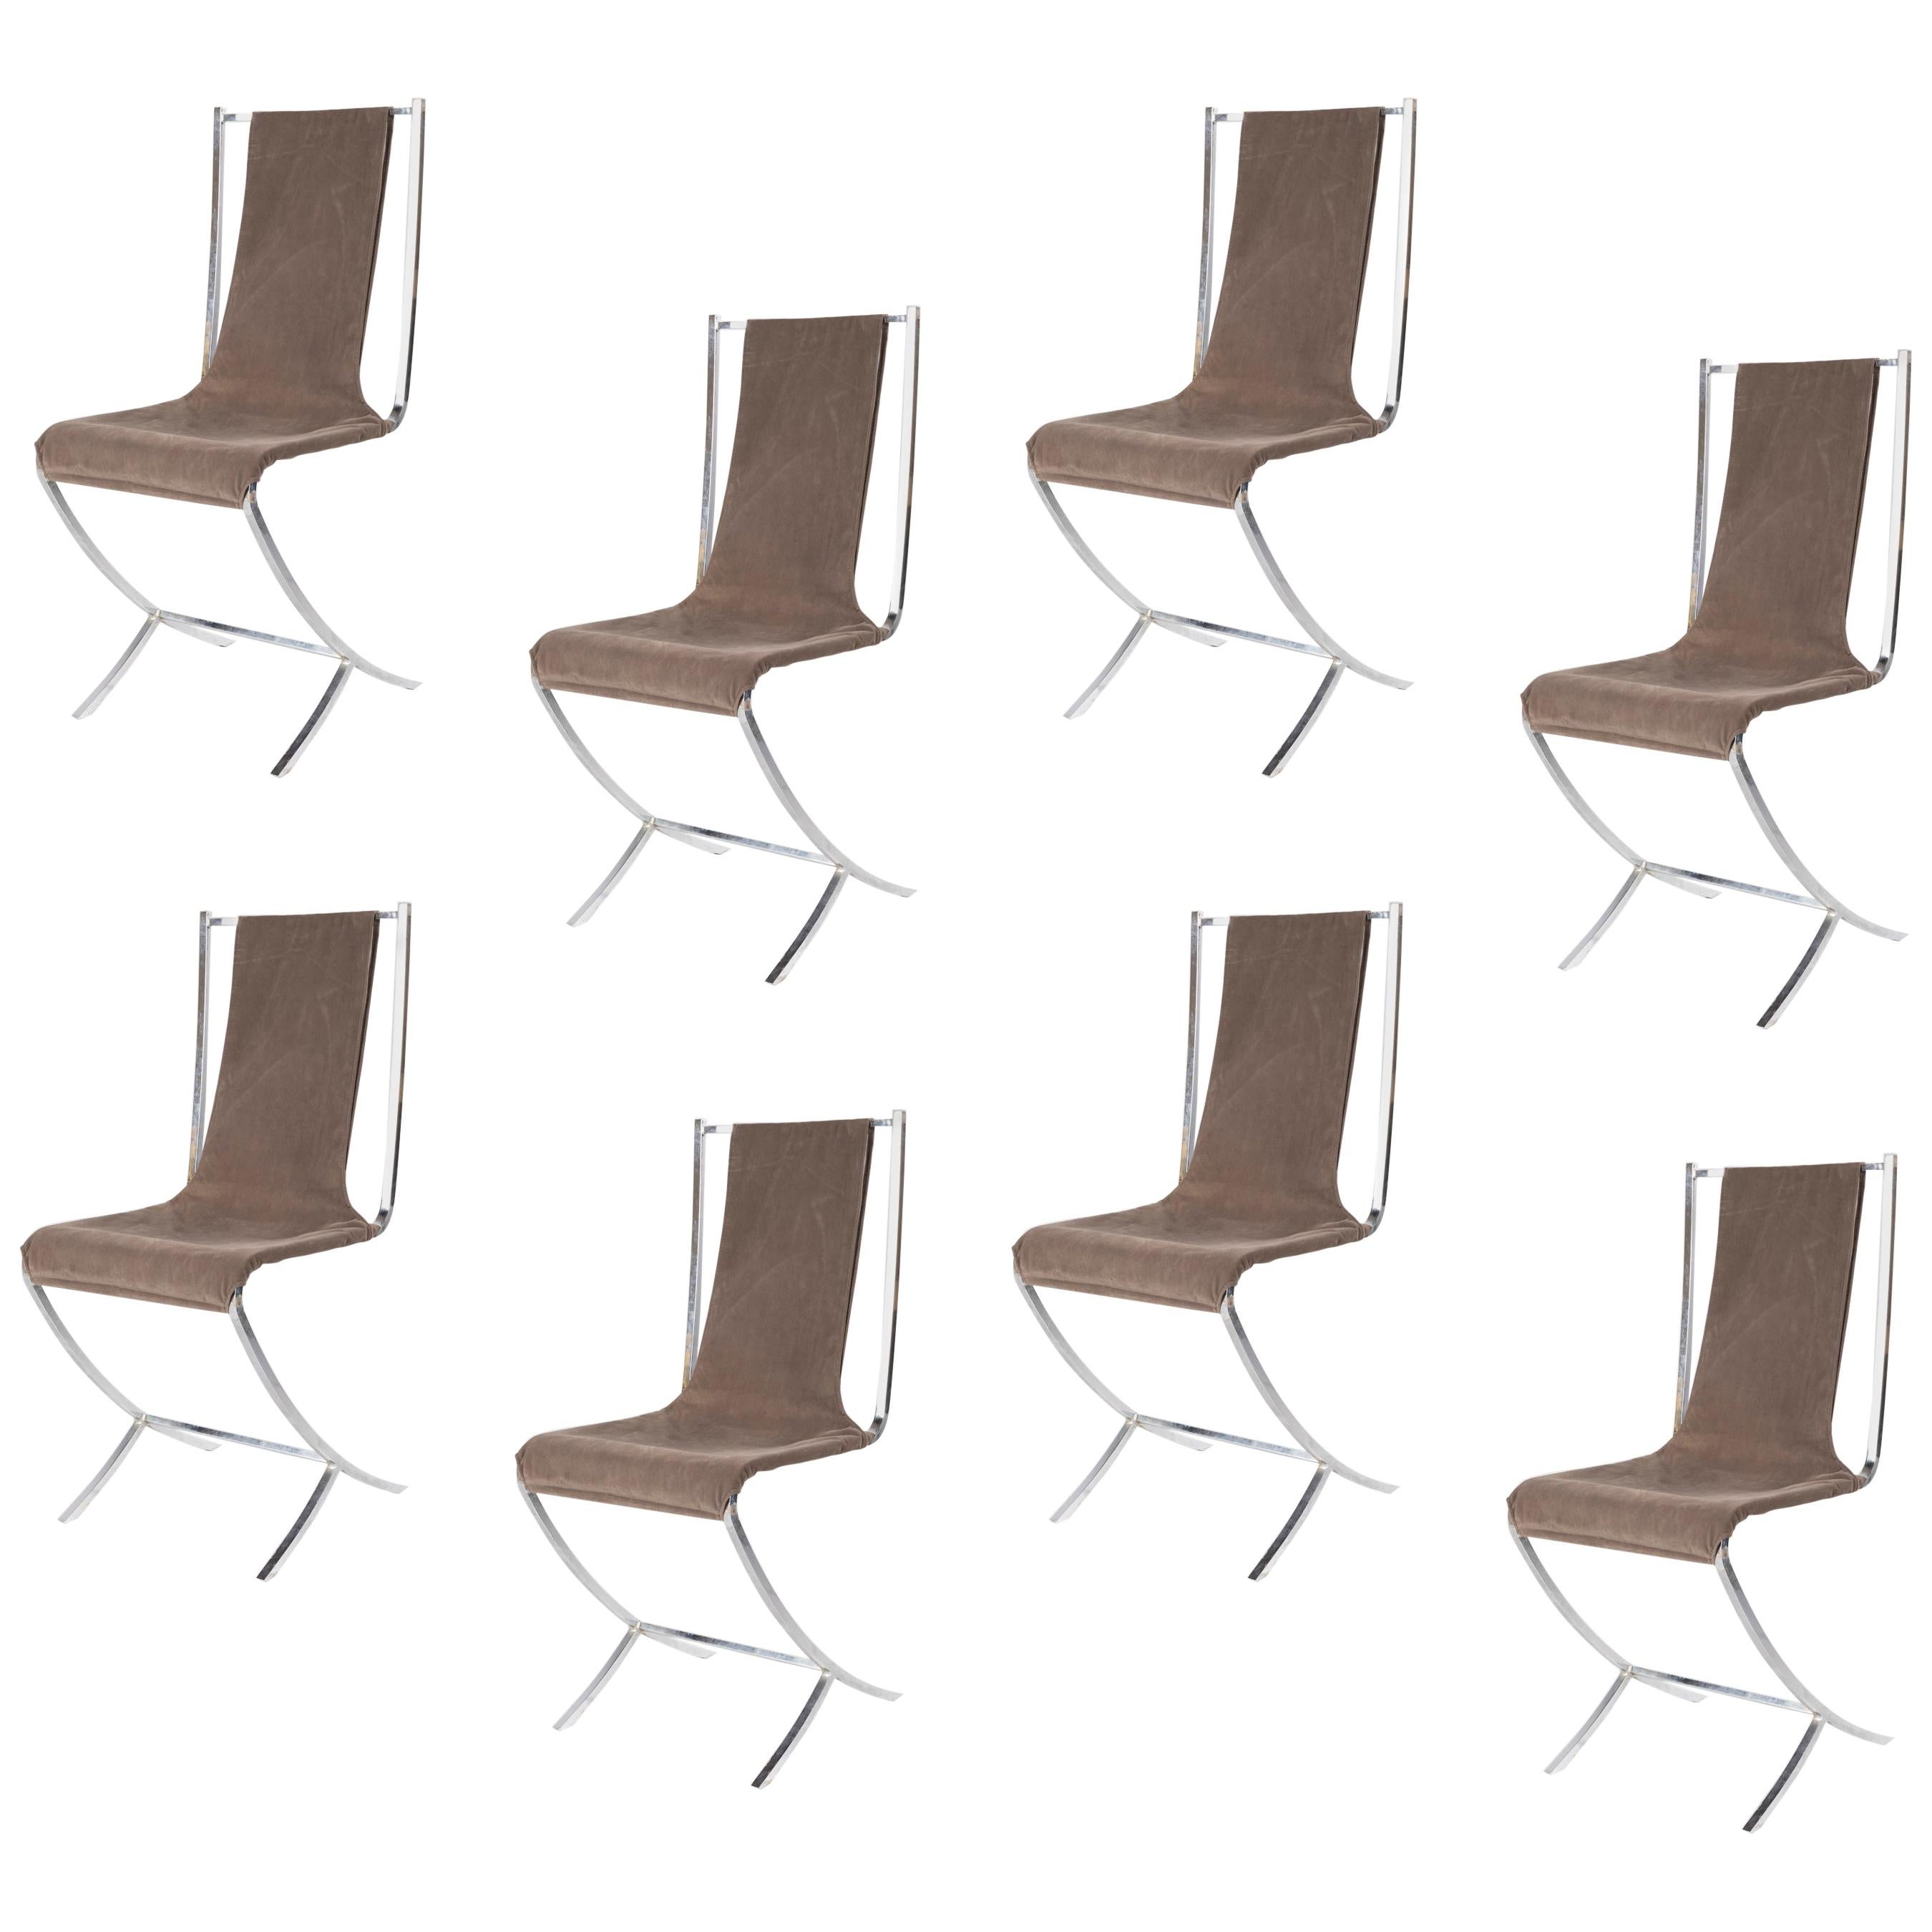 Pierre Cardin for Maison Jansen, a Set of Eight Chairs, 1970s